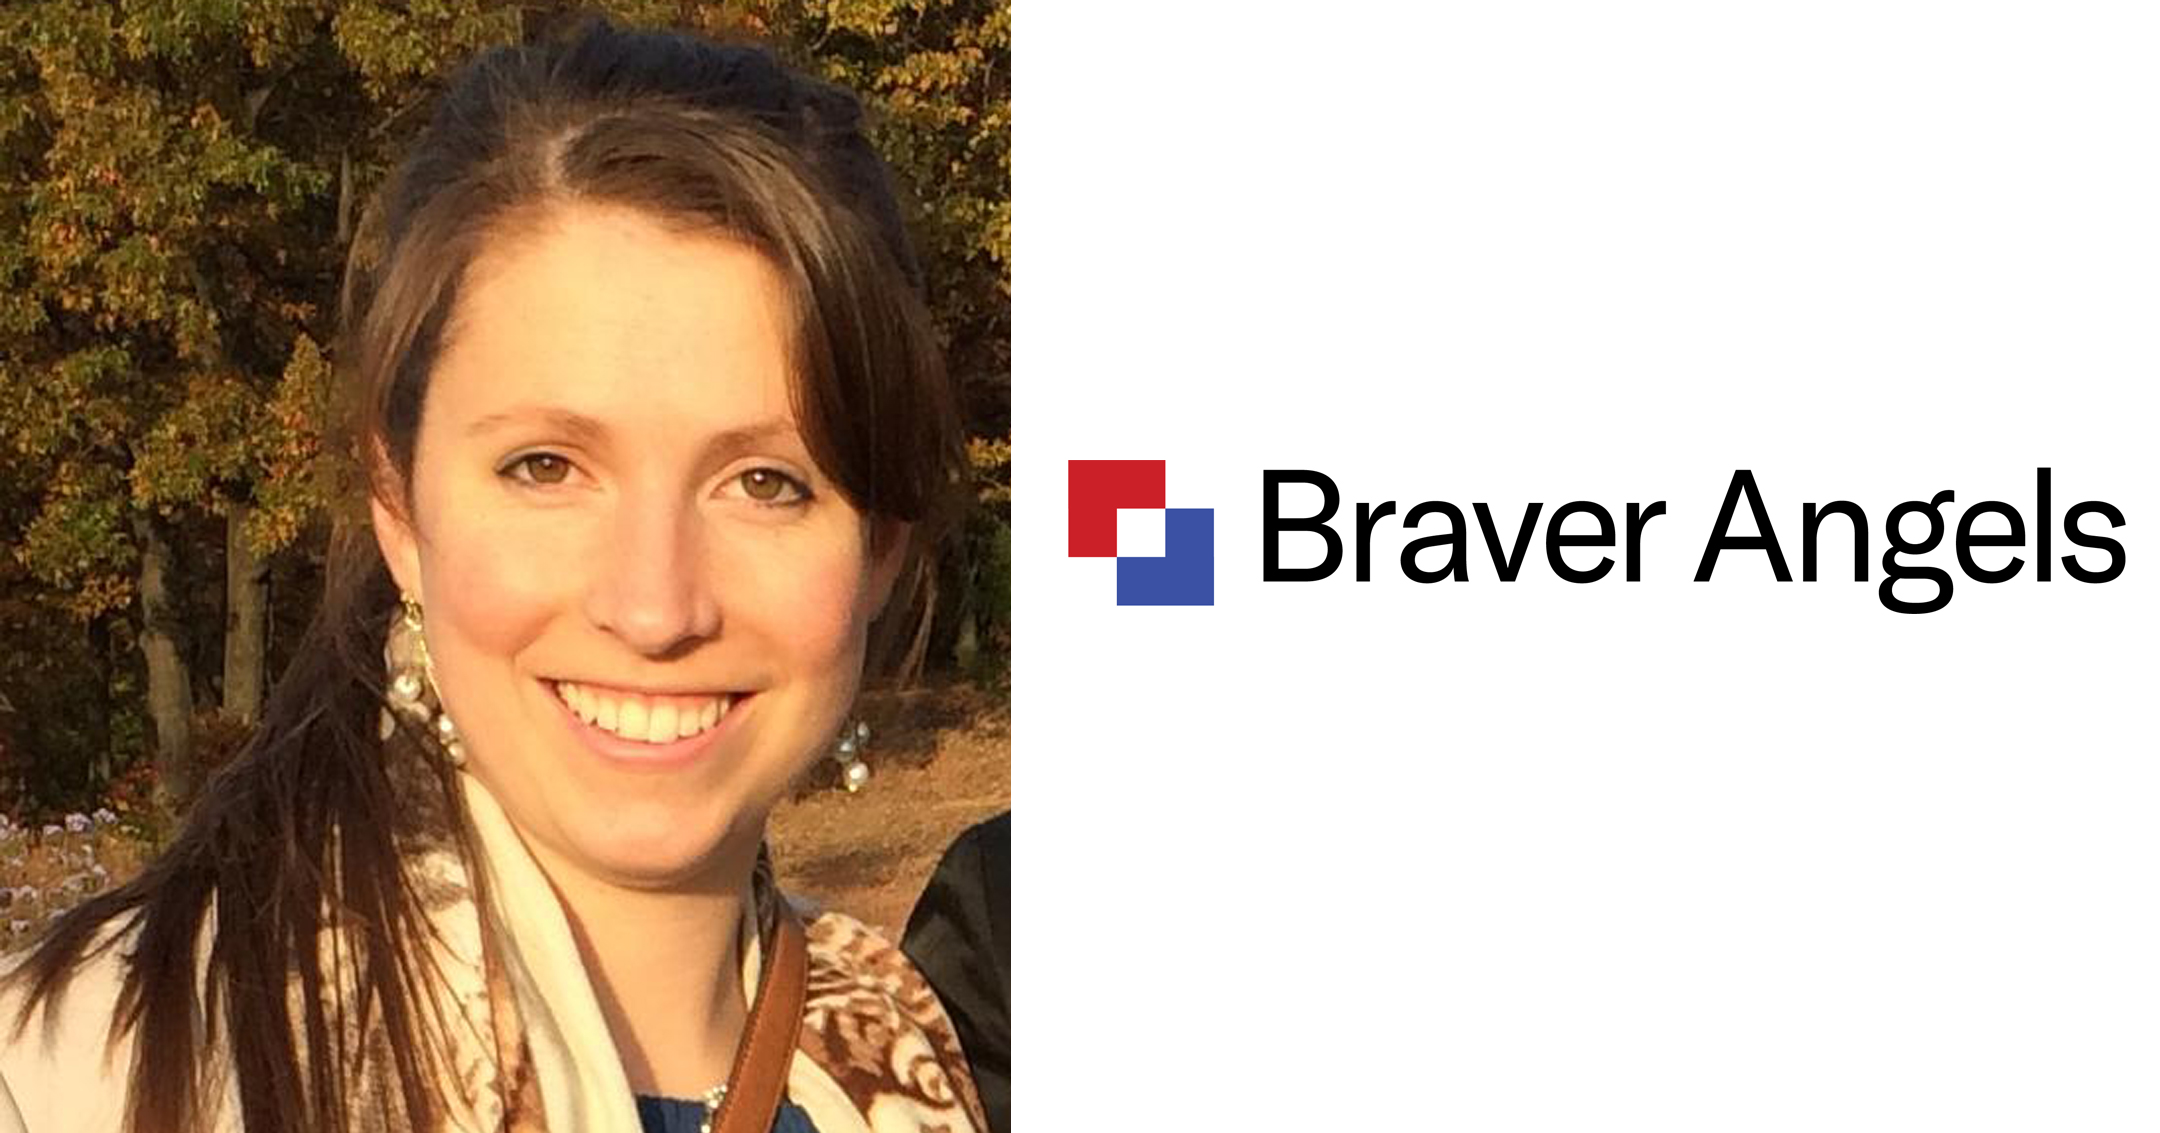 Headshot photo of April Lawson Kornfield on the left, Braver Angels logo on the right